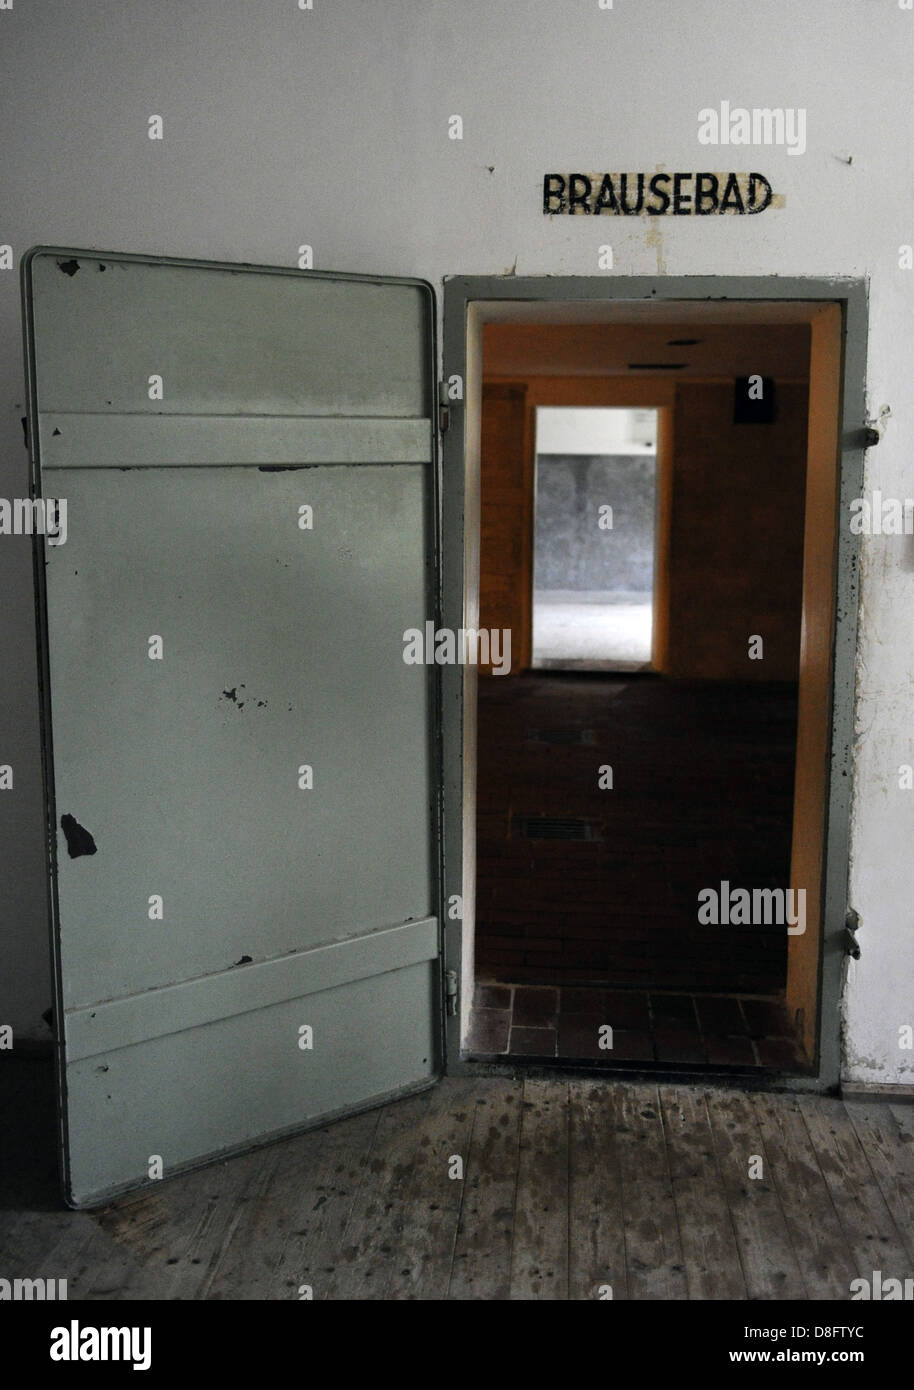 Dachau Concentration Camp. Nazi camp of prisoners opened in 1933. Access door to the gas chamber. Germany. Stock Photo